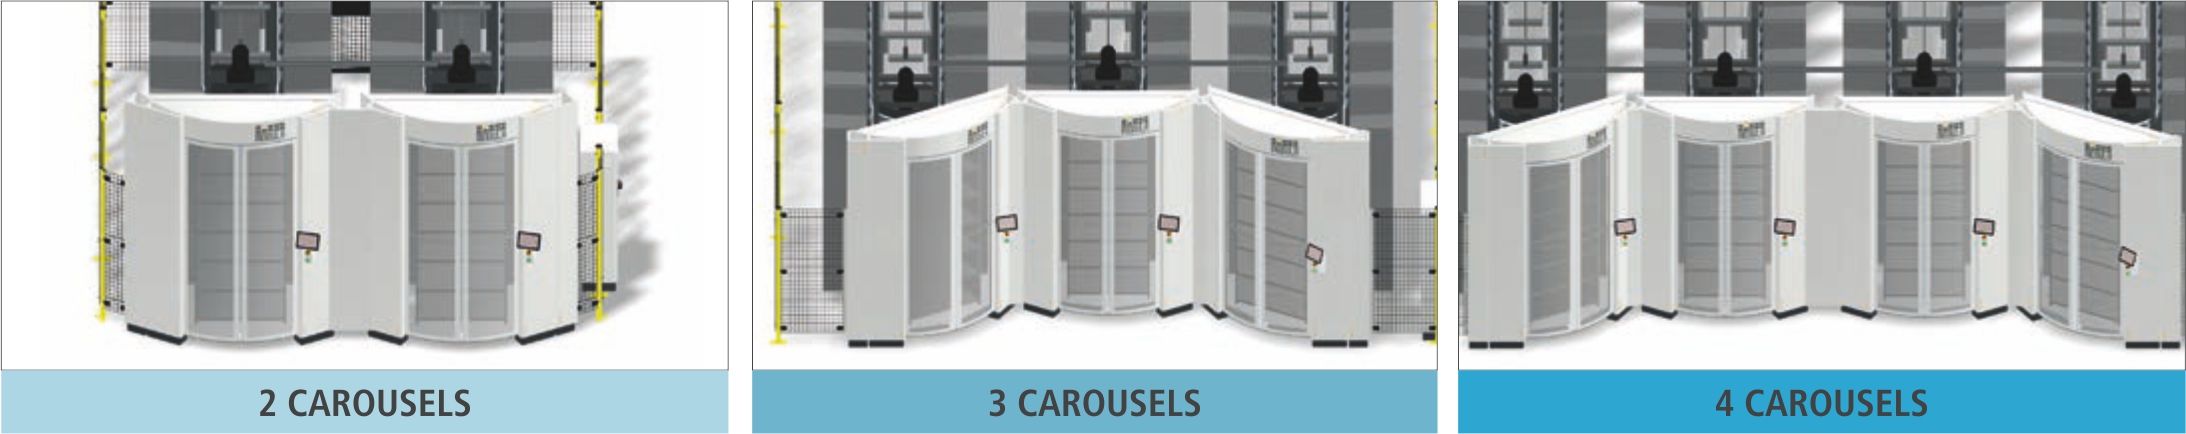 Automated horizontal carrousel from STAMH Group